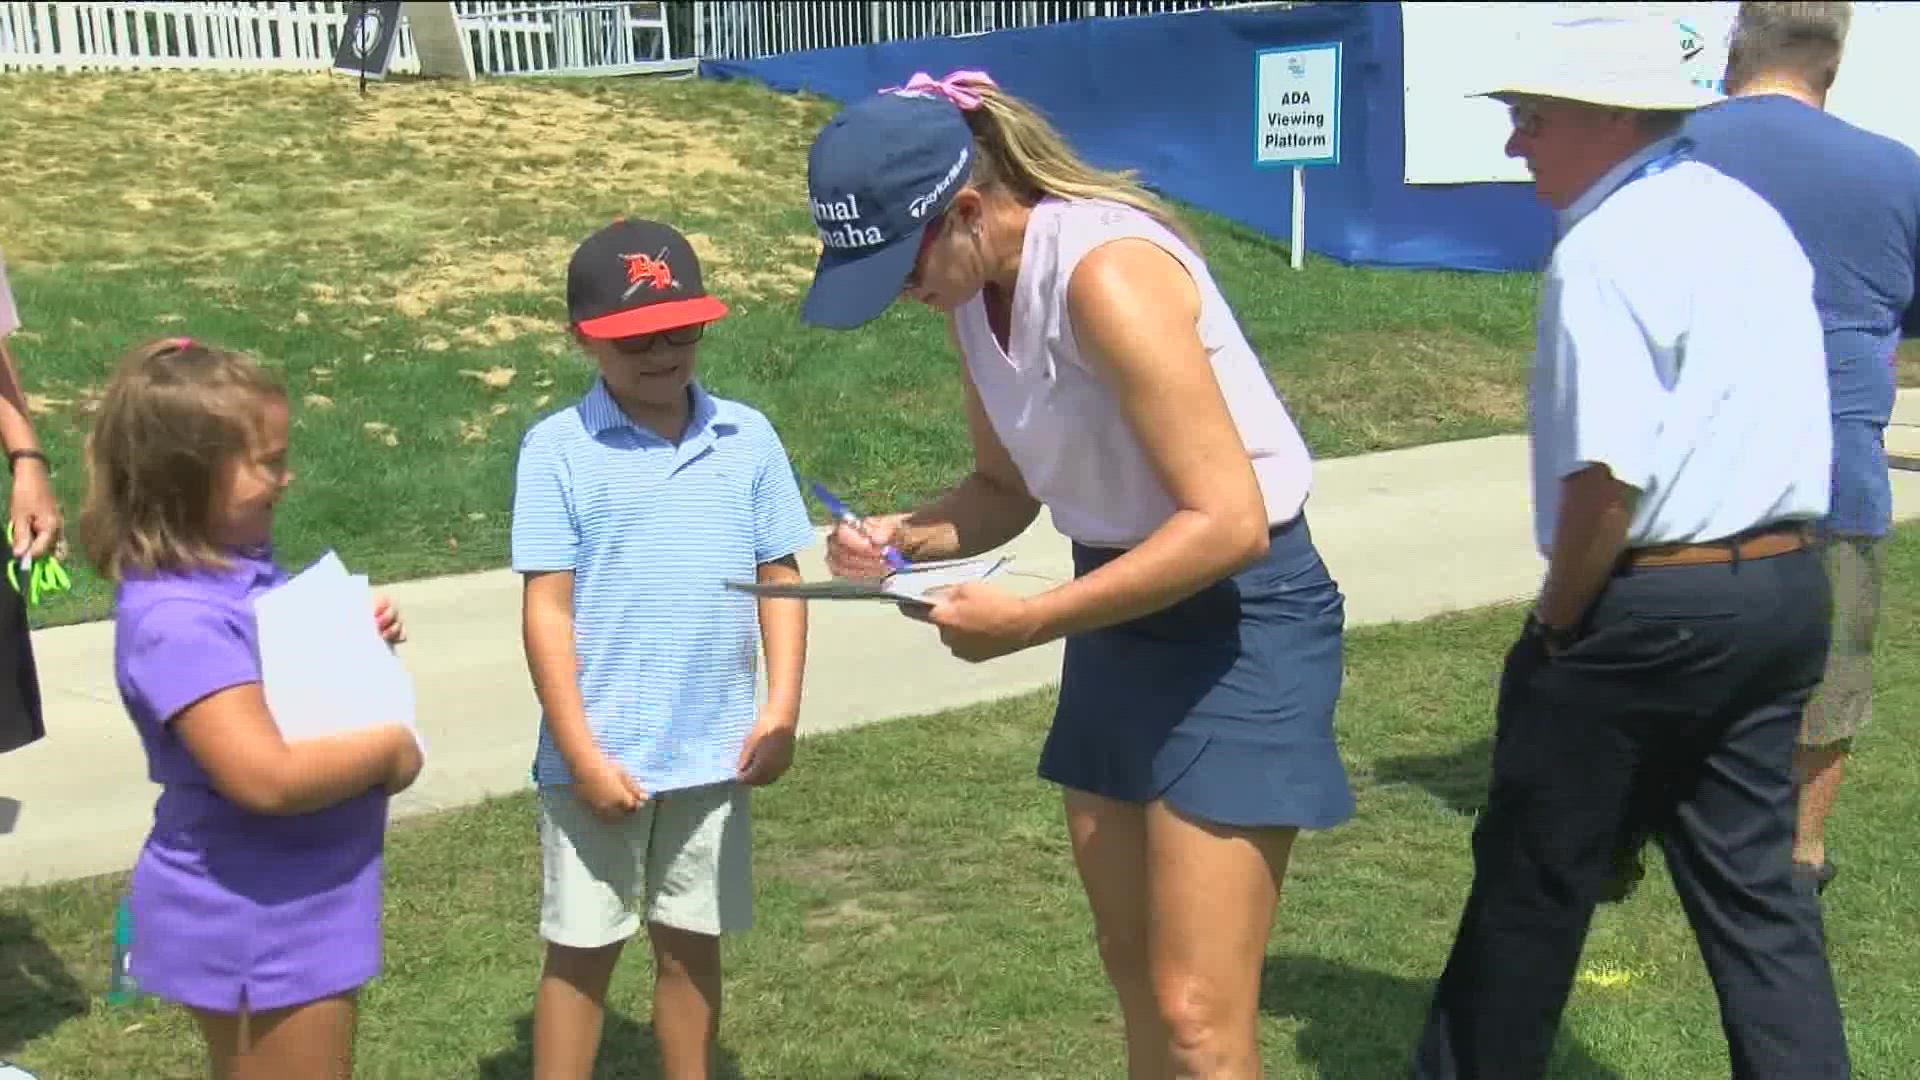 Before hitting the links, golfers hit the alleys for some bowling in Toledo. And Paula Creamer's set to take on the tournament where she holds the best record at.